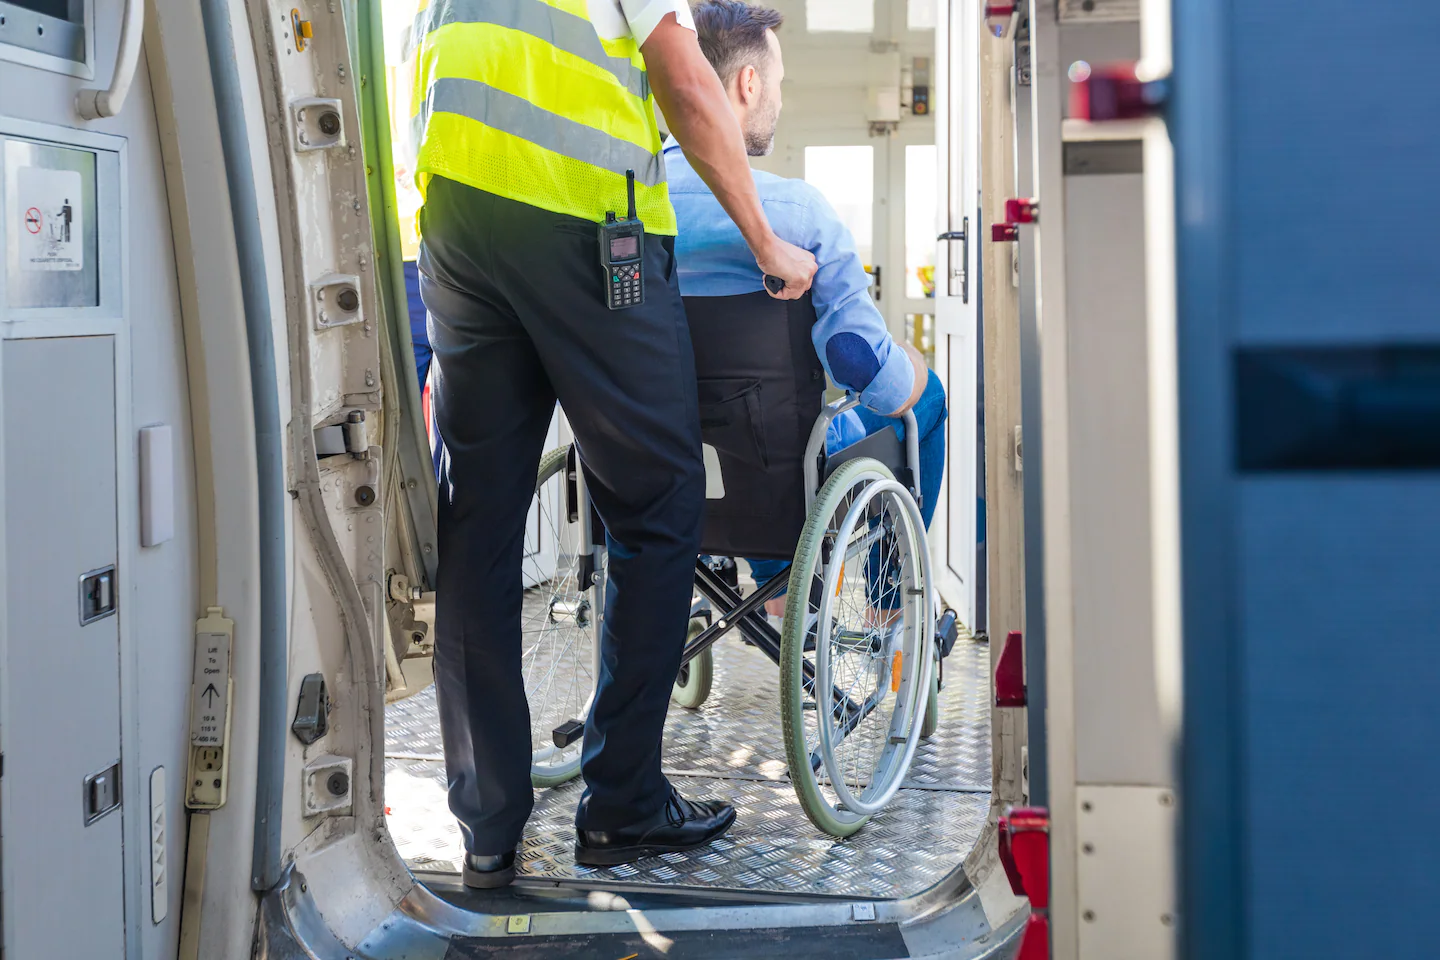 American Airlines Enhances Check-In Process for Mobility Device Users